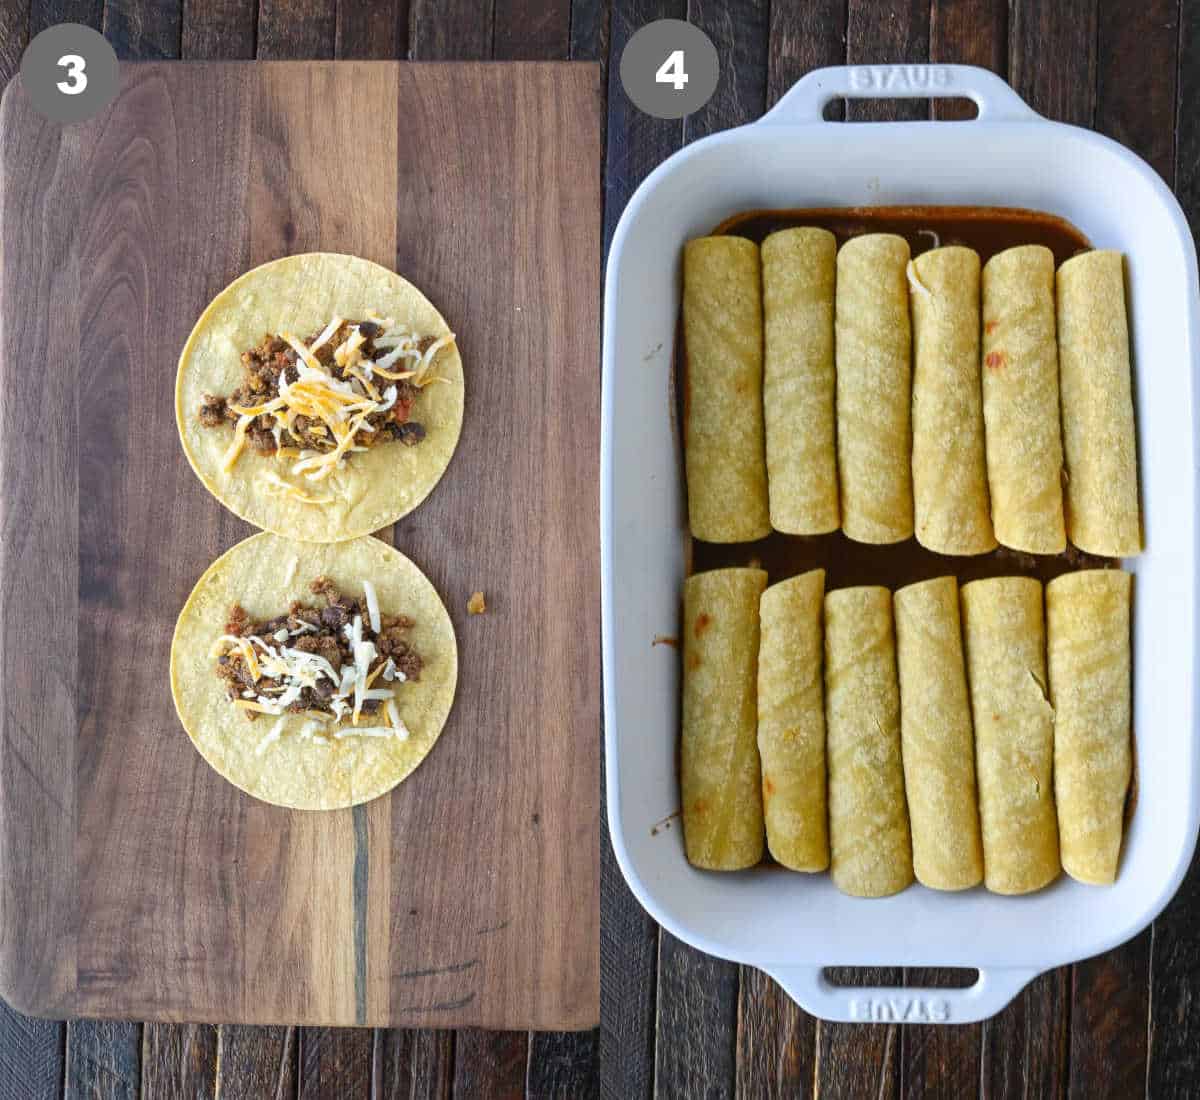 Ground beef and cheese placed on a corn tortilla and placed in a casserole dish.